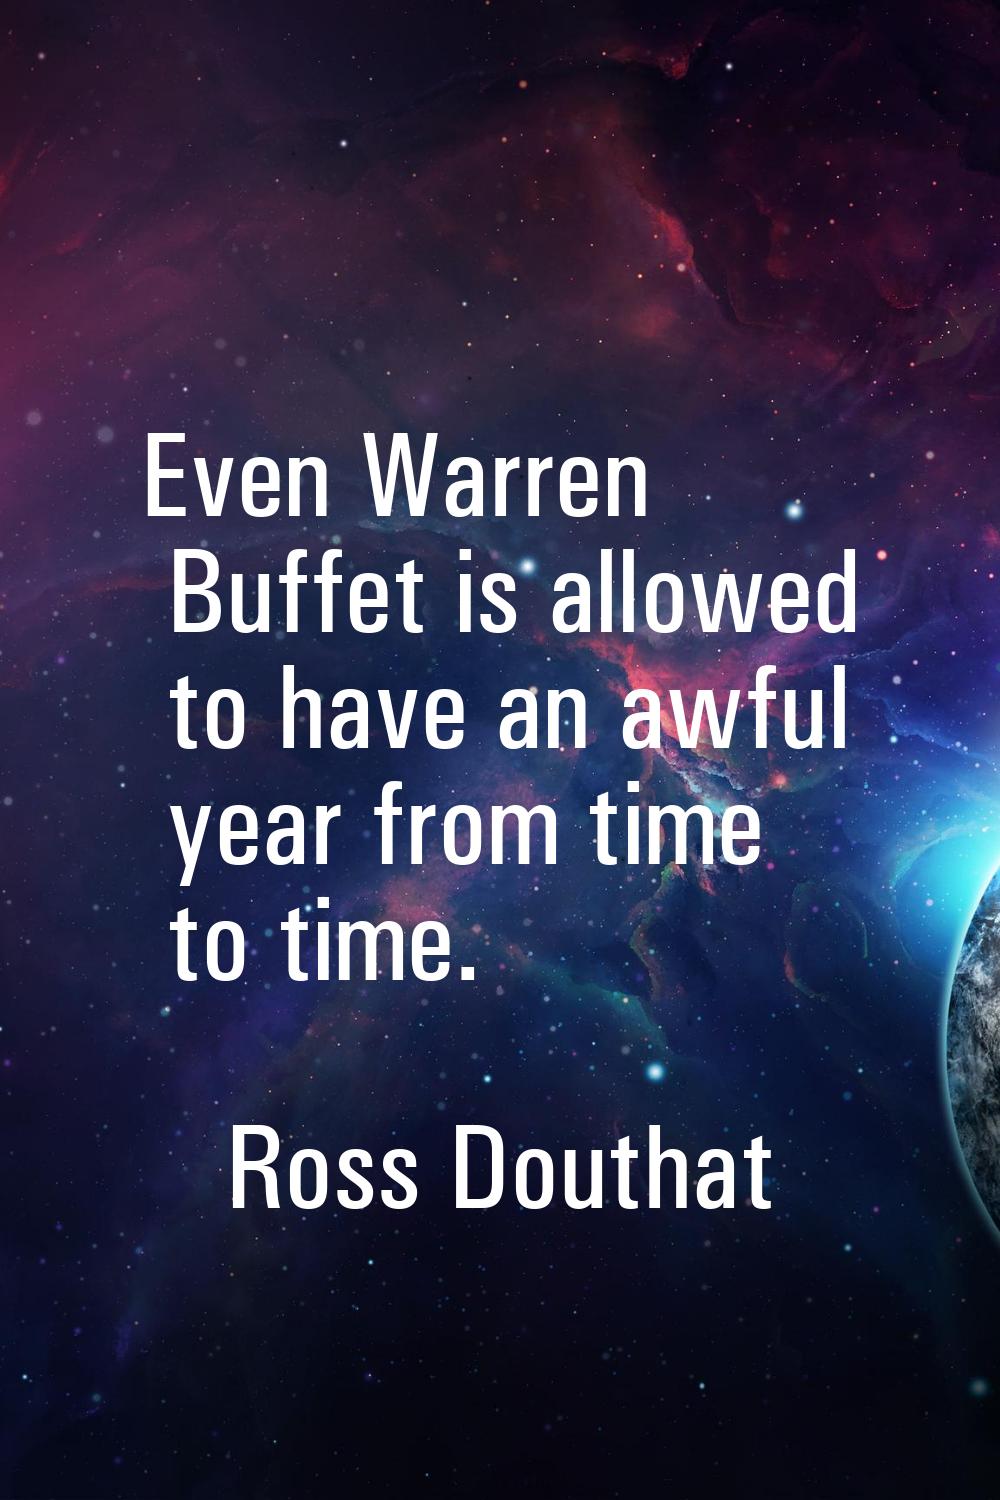 Even Warren Buffet is allowed to have an awful year from time to time.